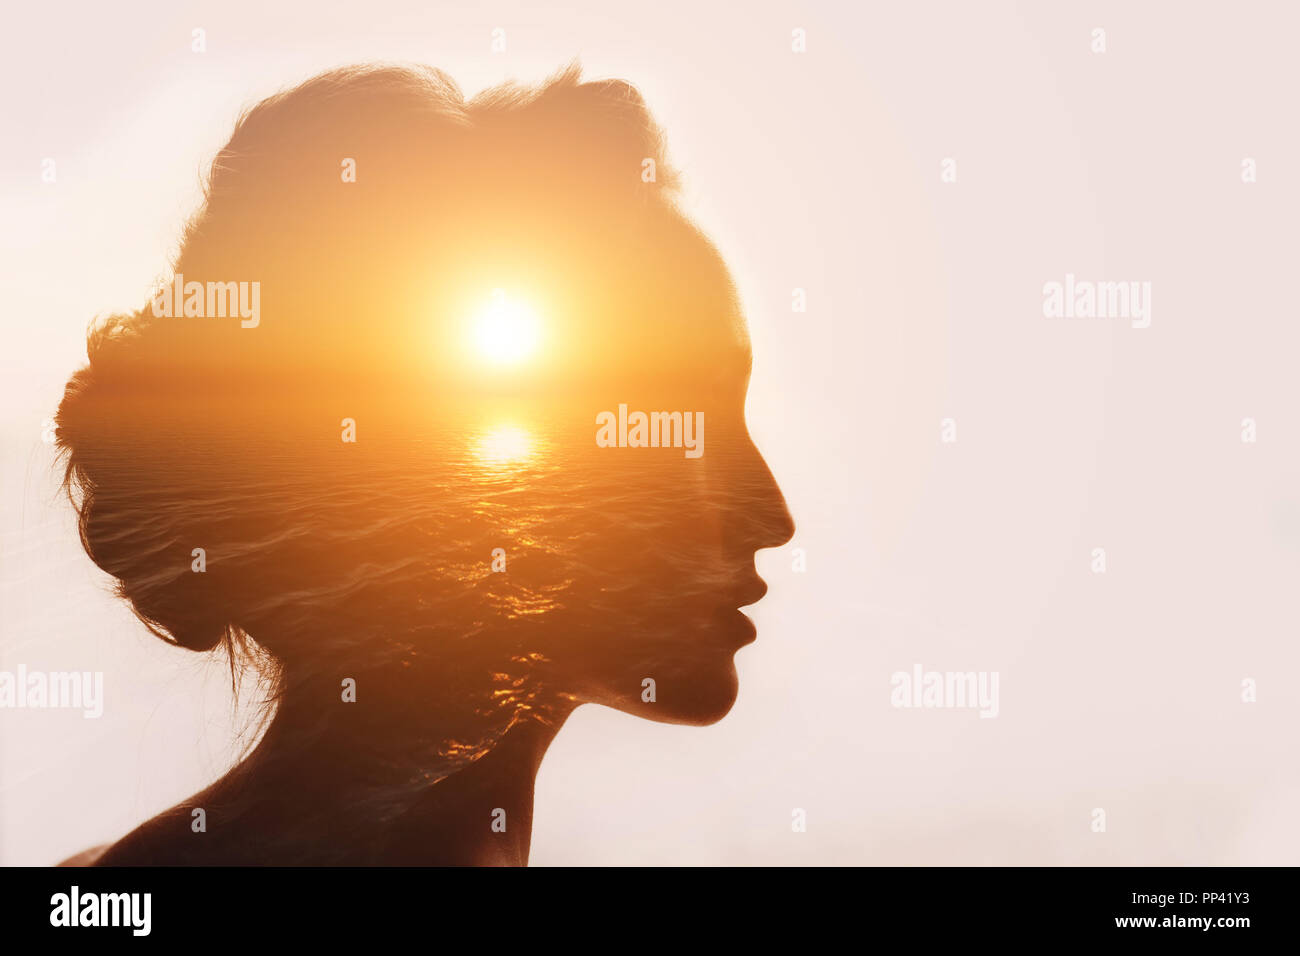 Philosophy concept. Sunrise and woman silhouette. Stock Photo